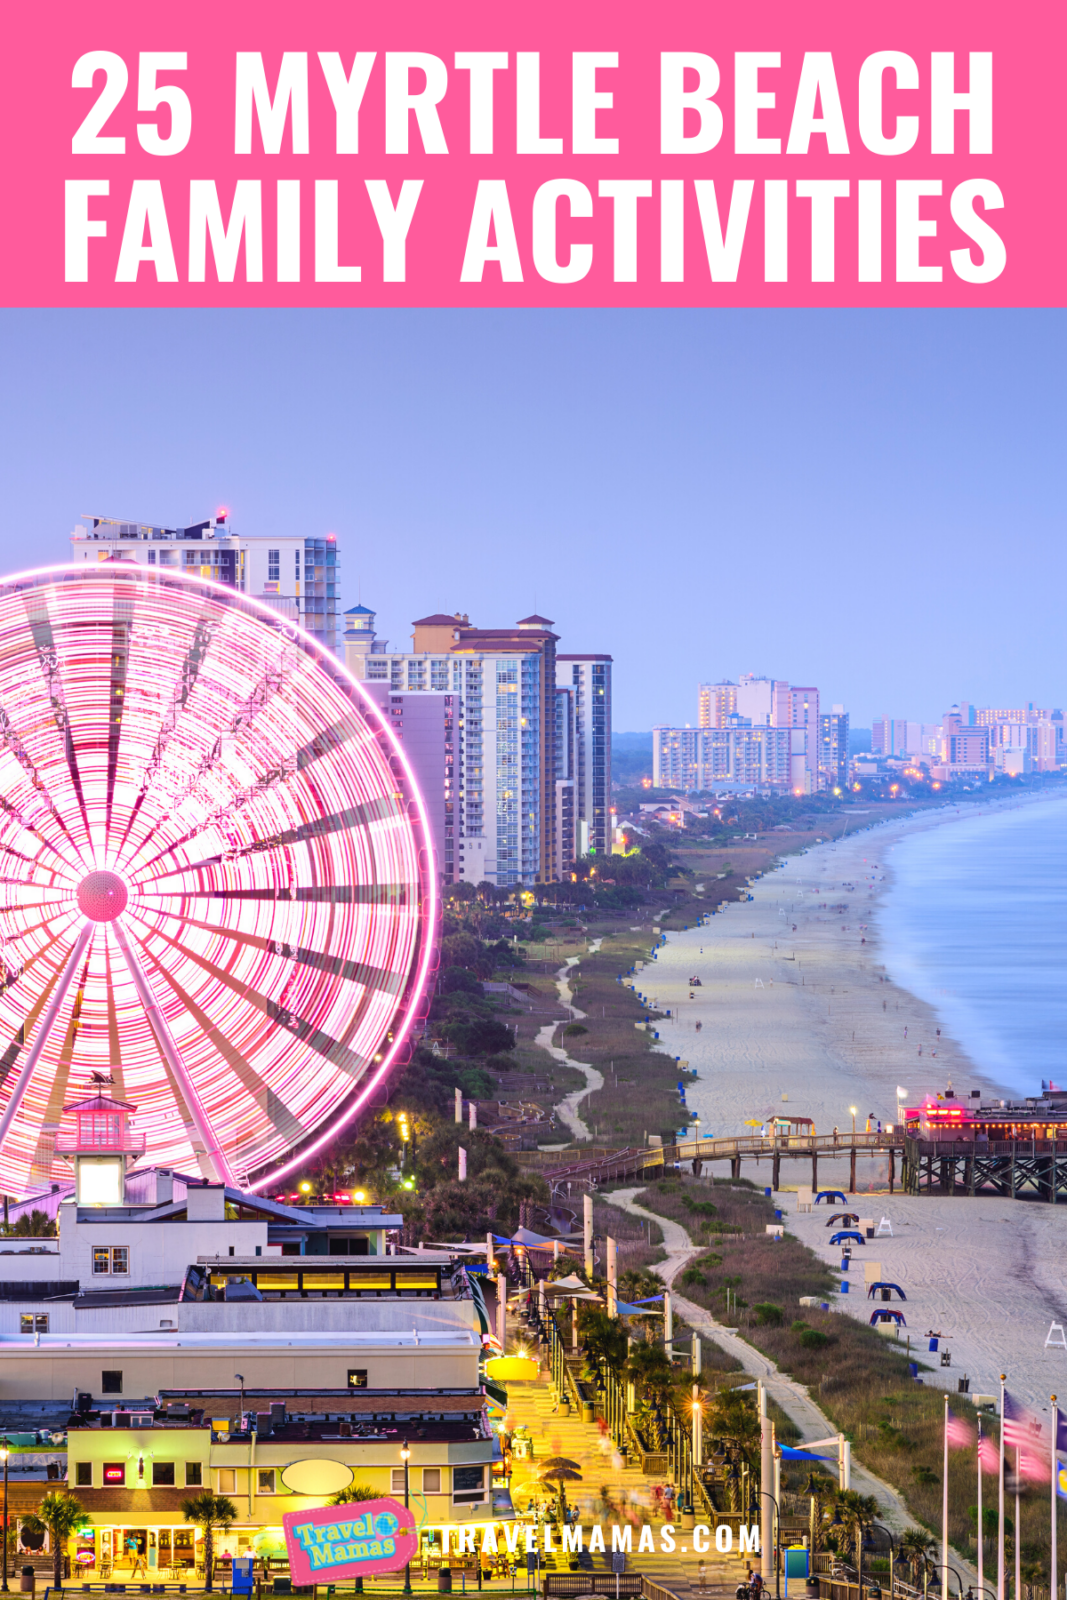 Things to Do in Myrtle Beach with Kids 